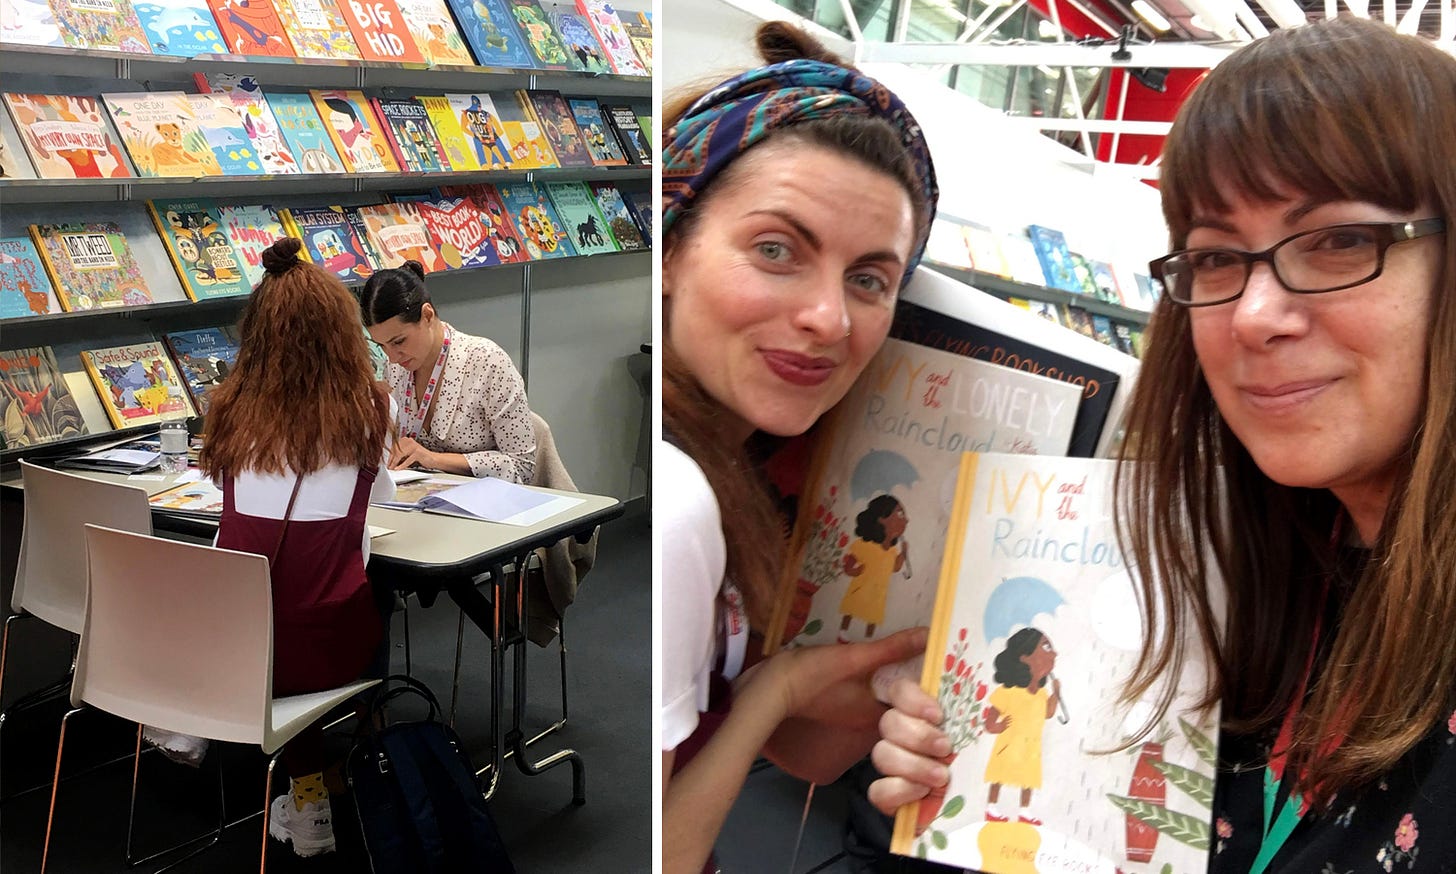 Left: Ema Malyauka getting a portfolio review at Flying Eye. Right: Ema and I with our new copies of Ivy and the Raincloud by Katie Harnett